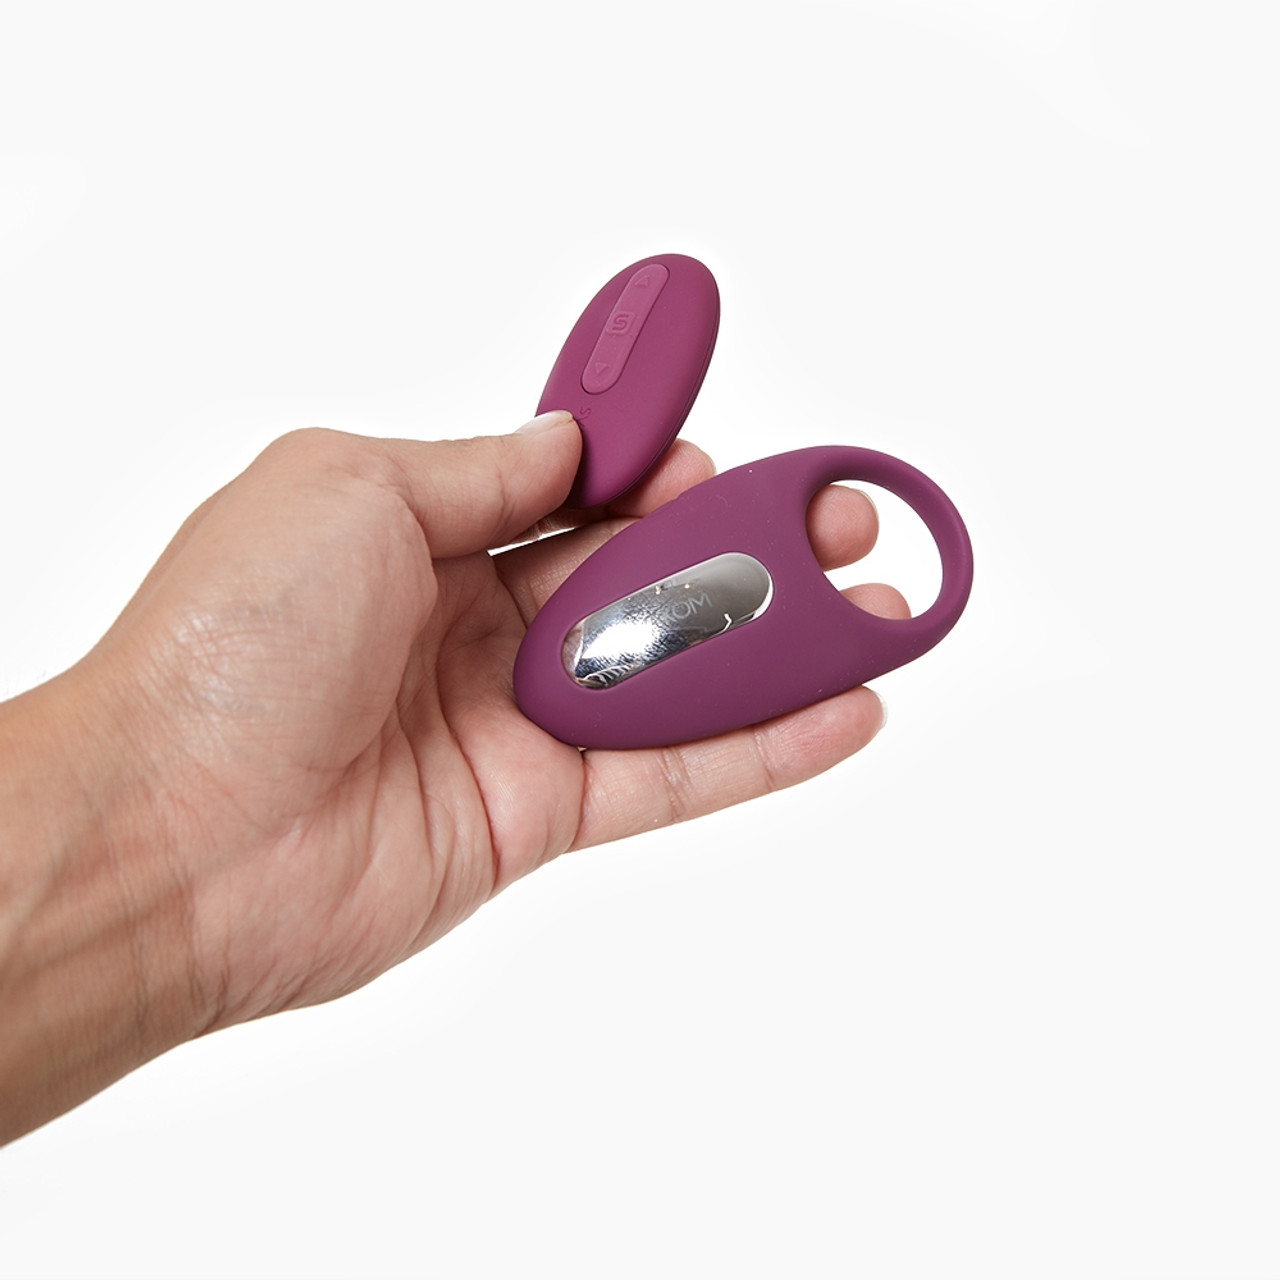 Svakom Winni vibrating cock ring with remote held in hand